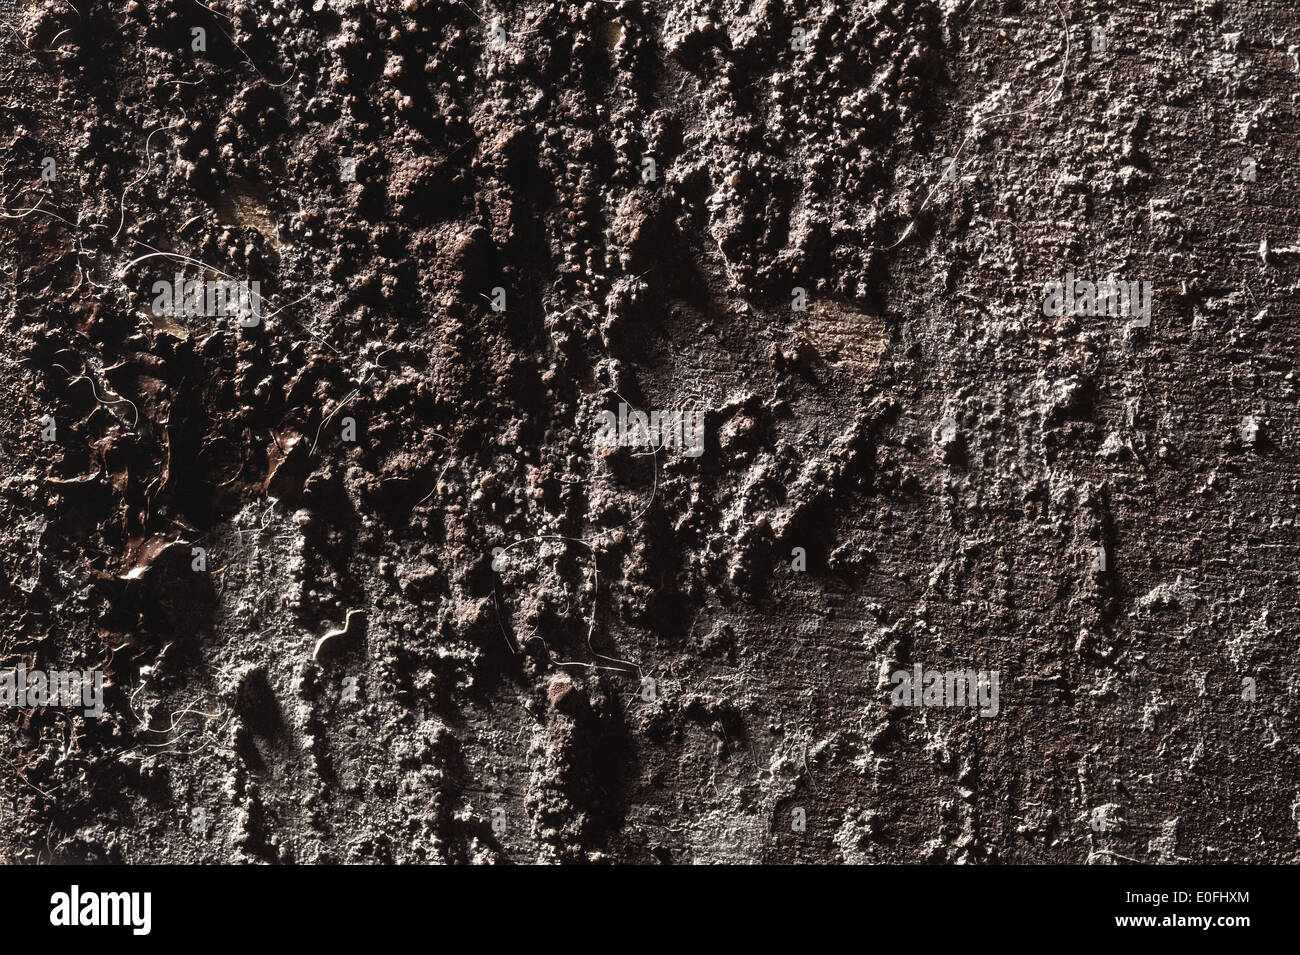 raised layers of dirt dust fungi spores covering surface of timber like an alien world full of craters like moon surface Stock Photo